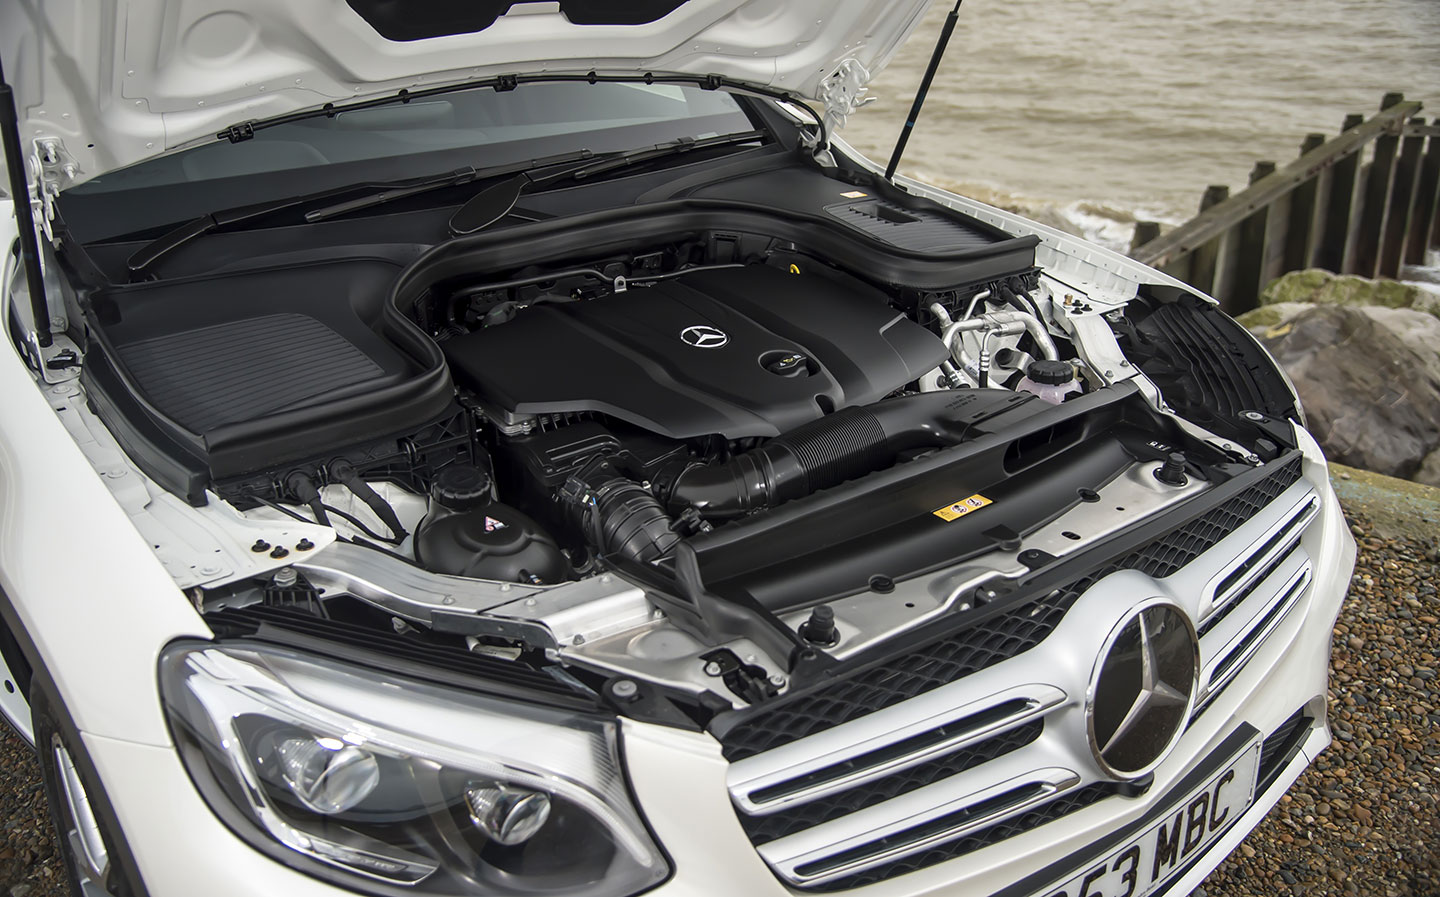 Mercedes-Benz affected by emissions defeat device recall in Germany